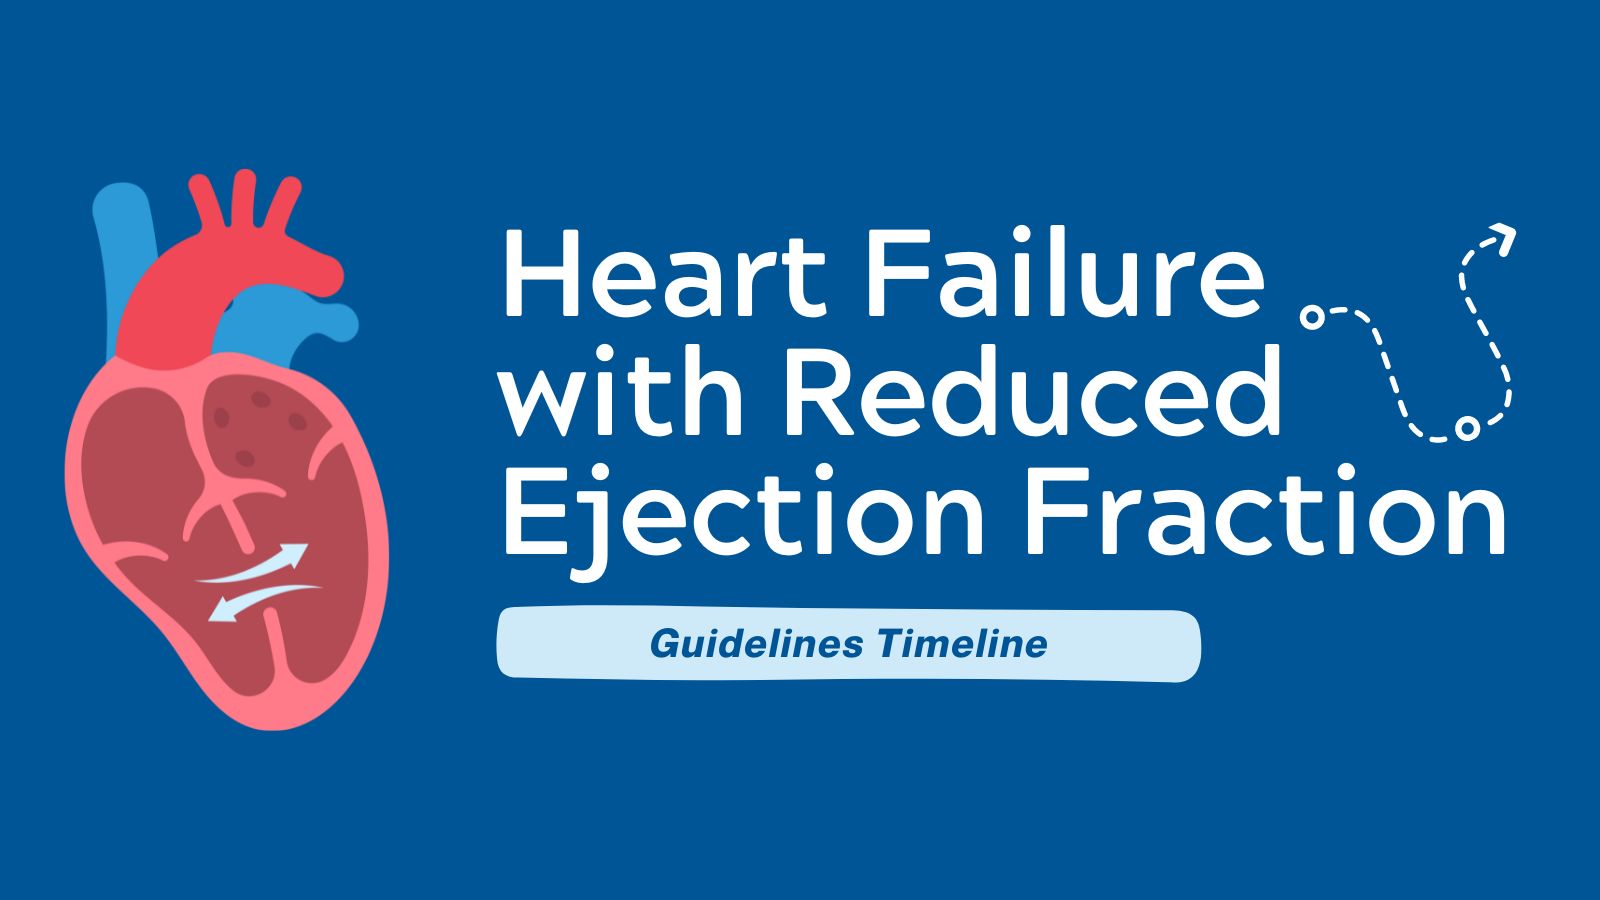 Guidelines Timeline - Heart Failure with Reduced Ejection Fraction (HFrEF)